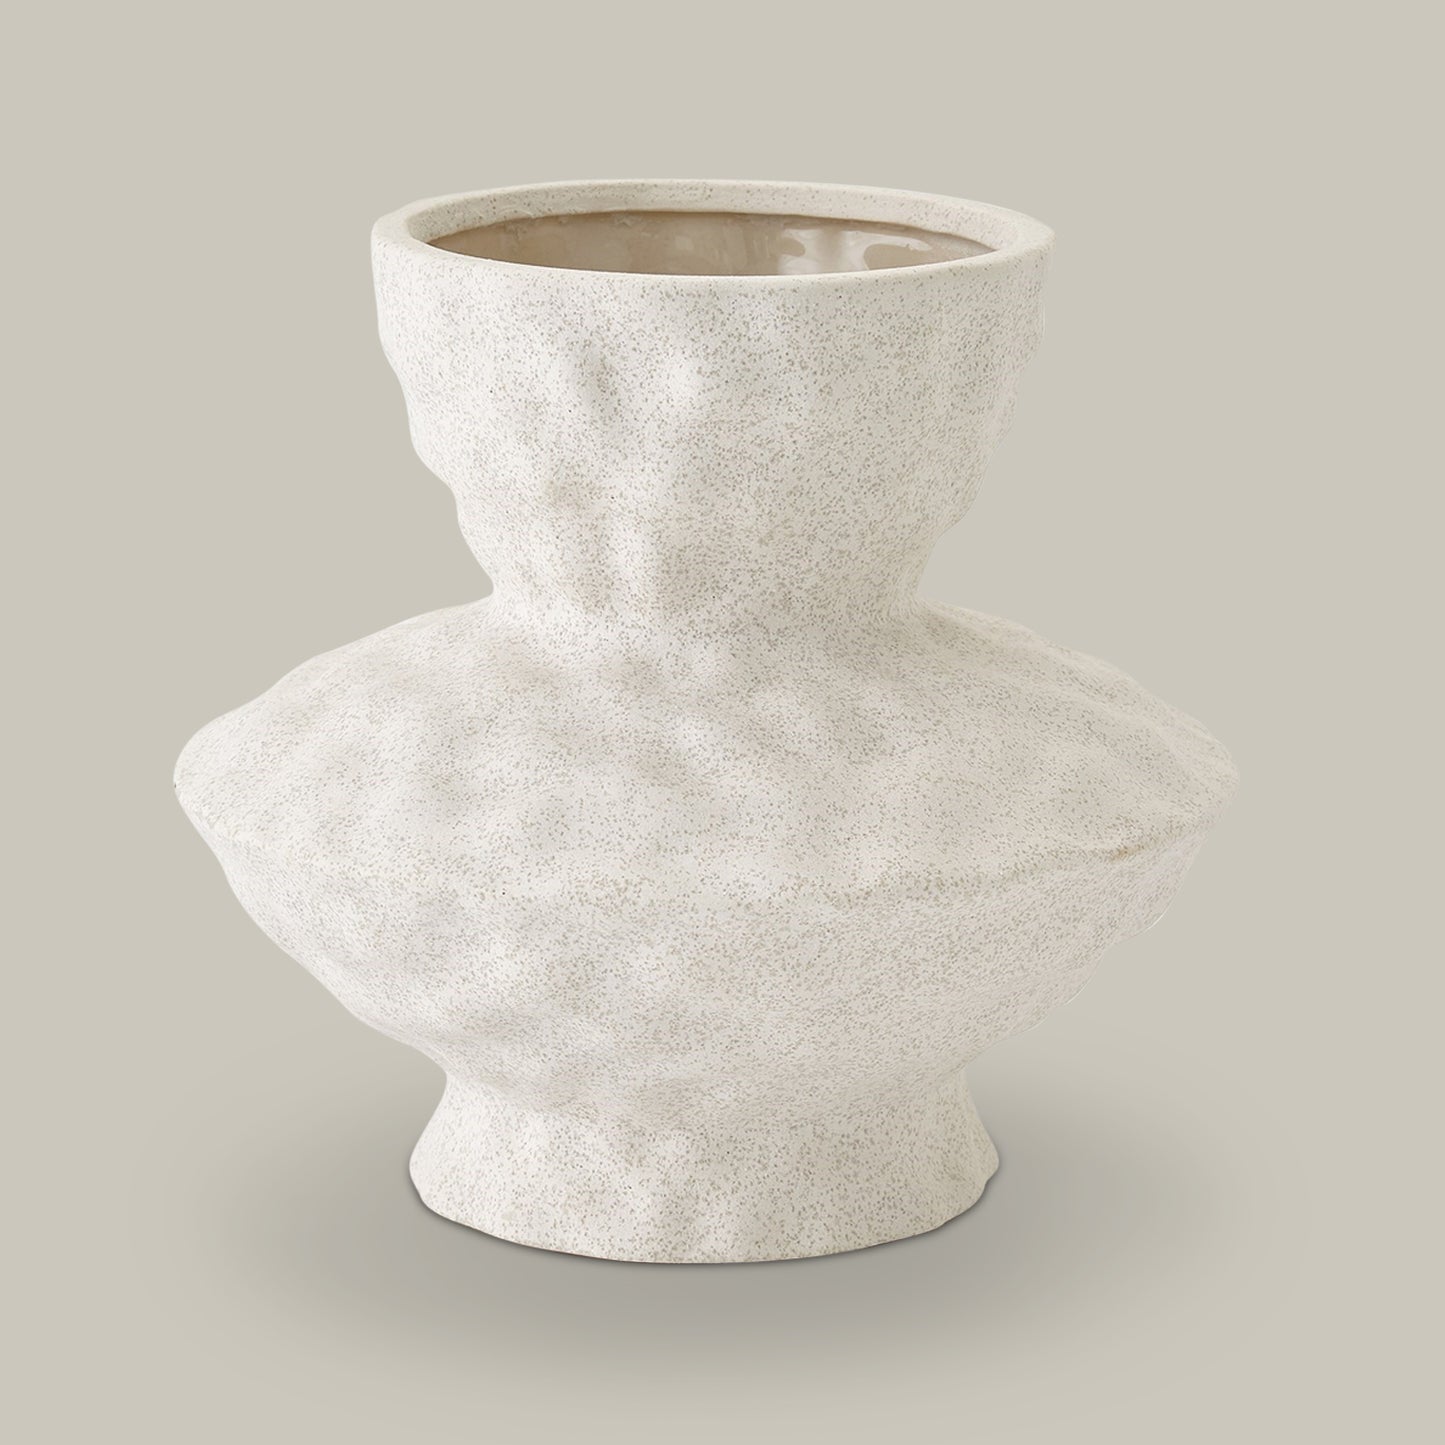 ÉTIENNE AND ANTOINE VASE COLLECTION (Volcanic White) - Preorder